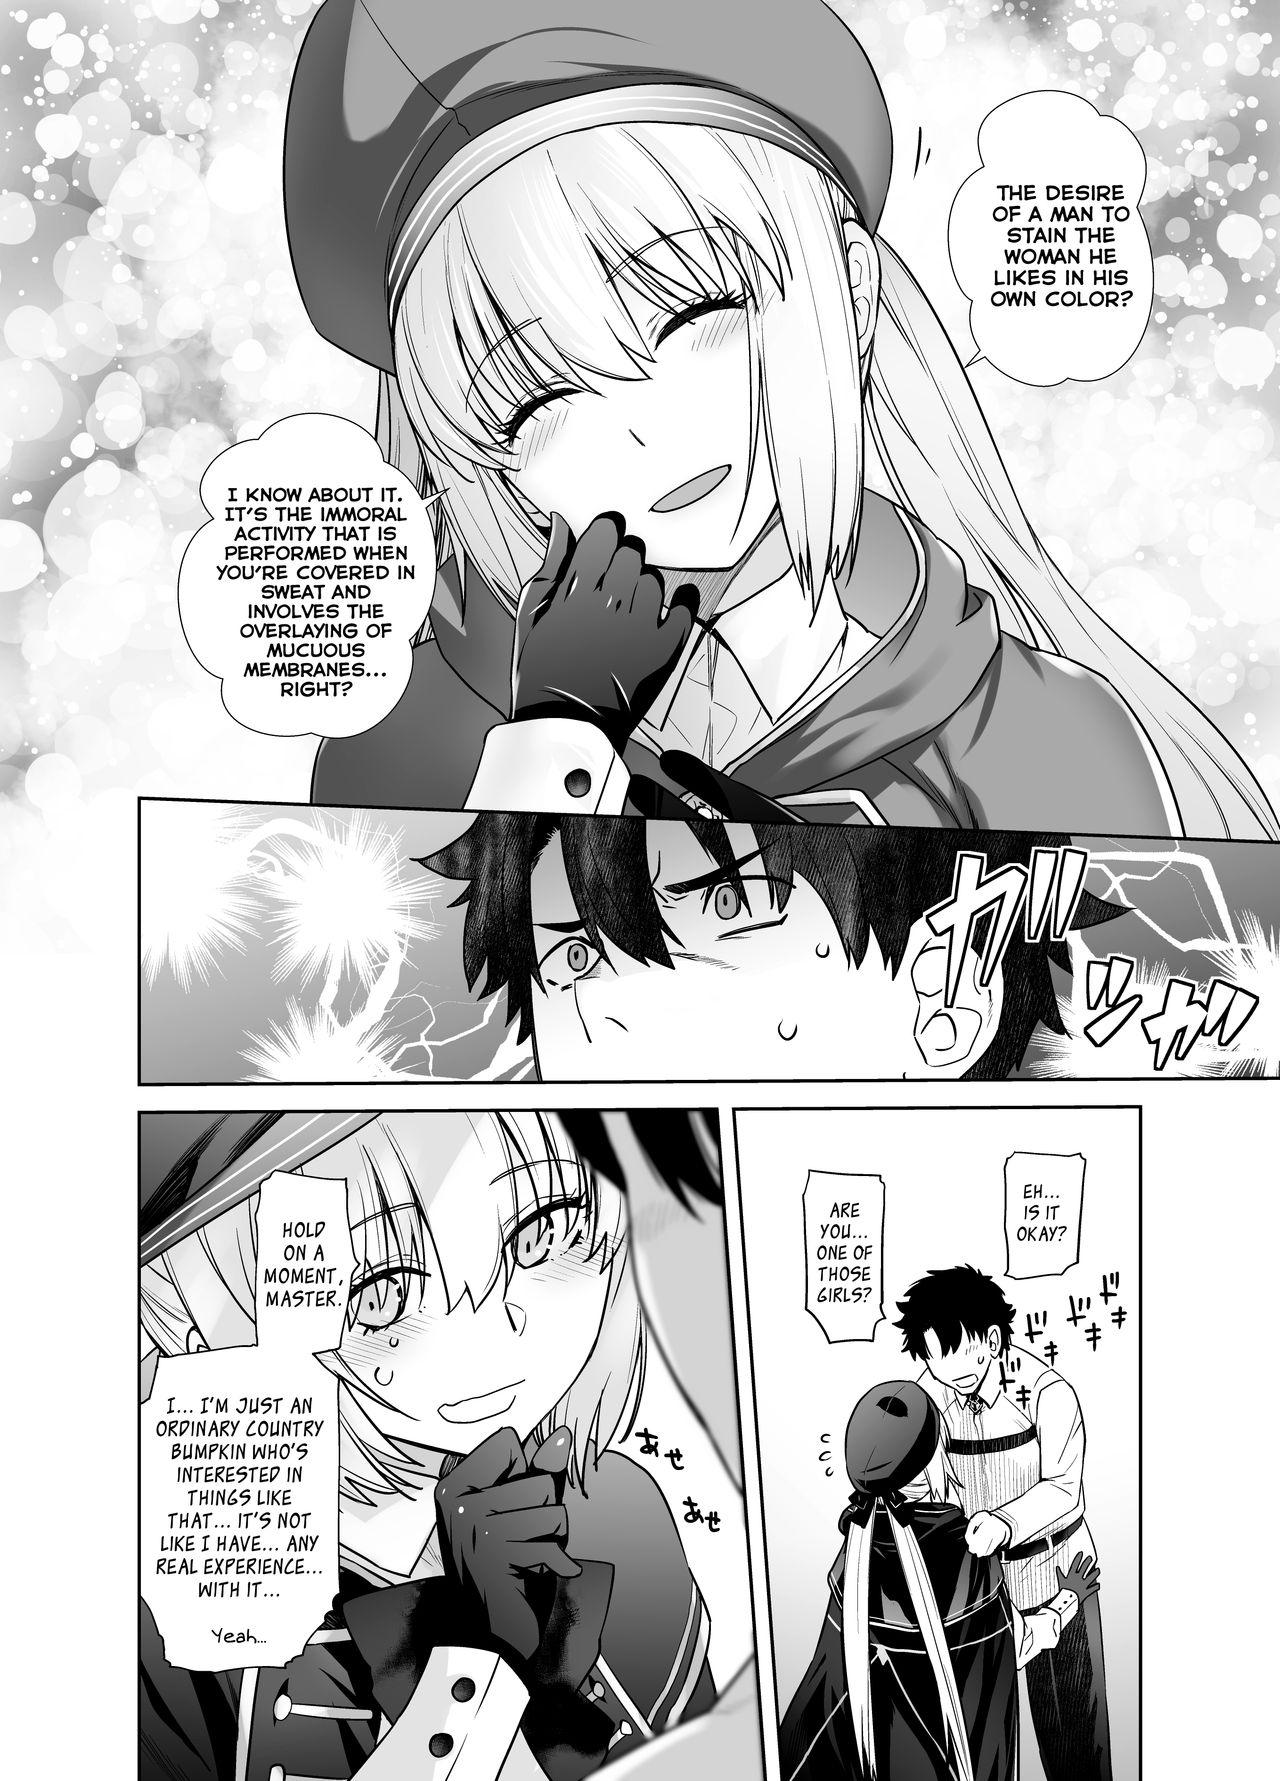 Curious HEAVEN'S DRIVE 6 - Fate grand order Animated - Page 8